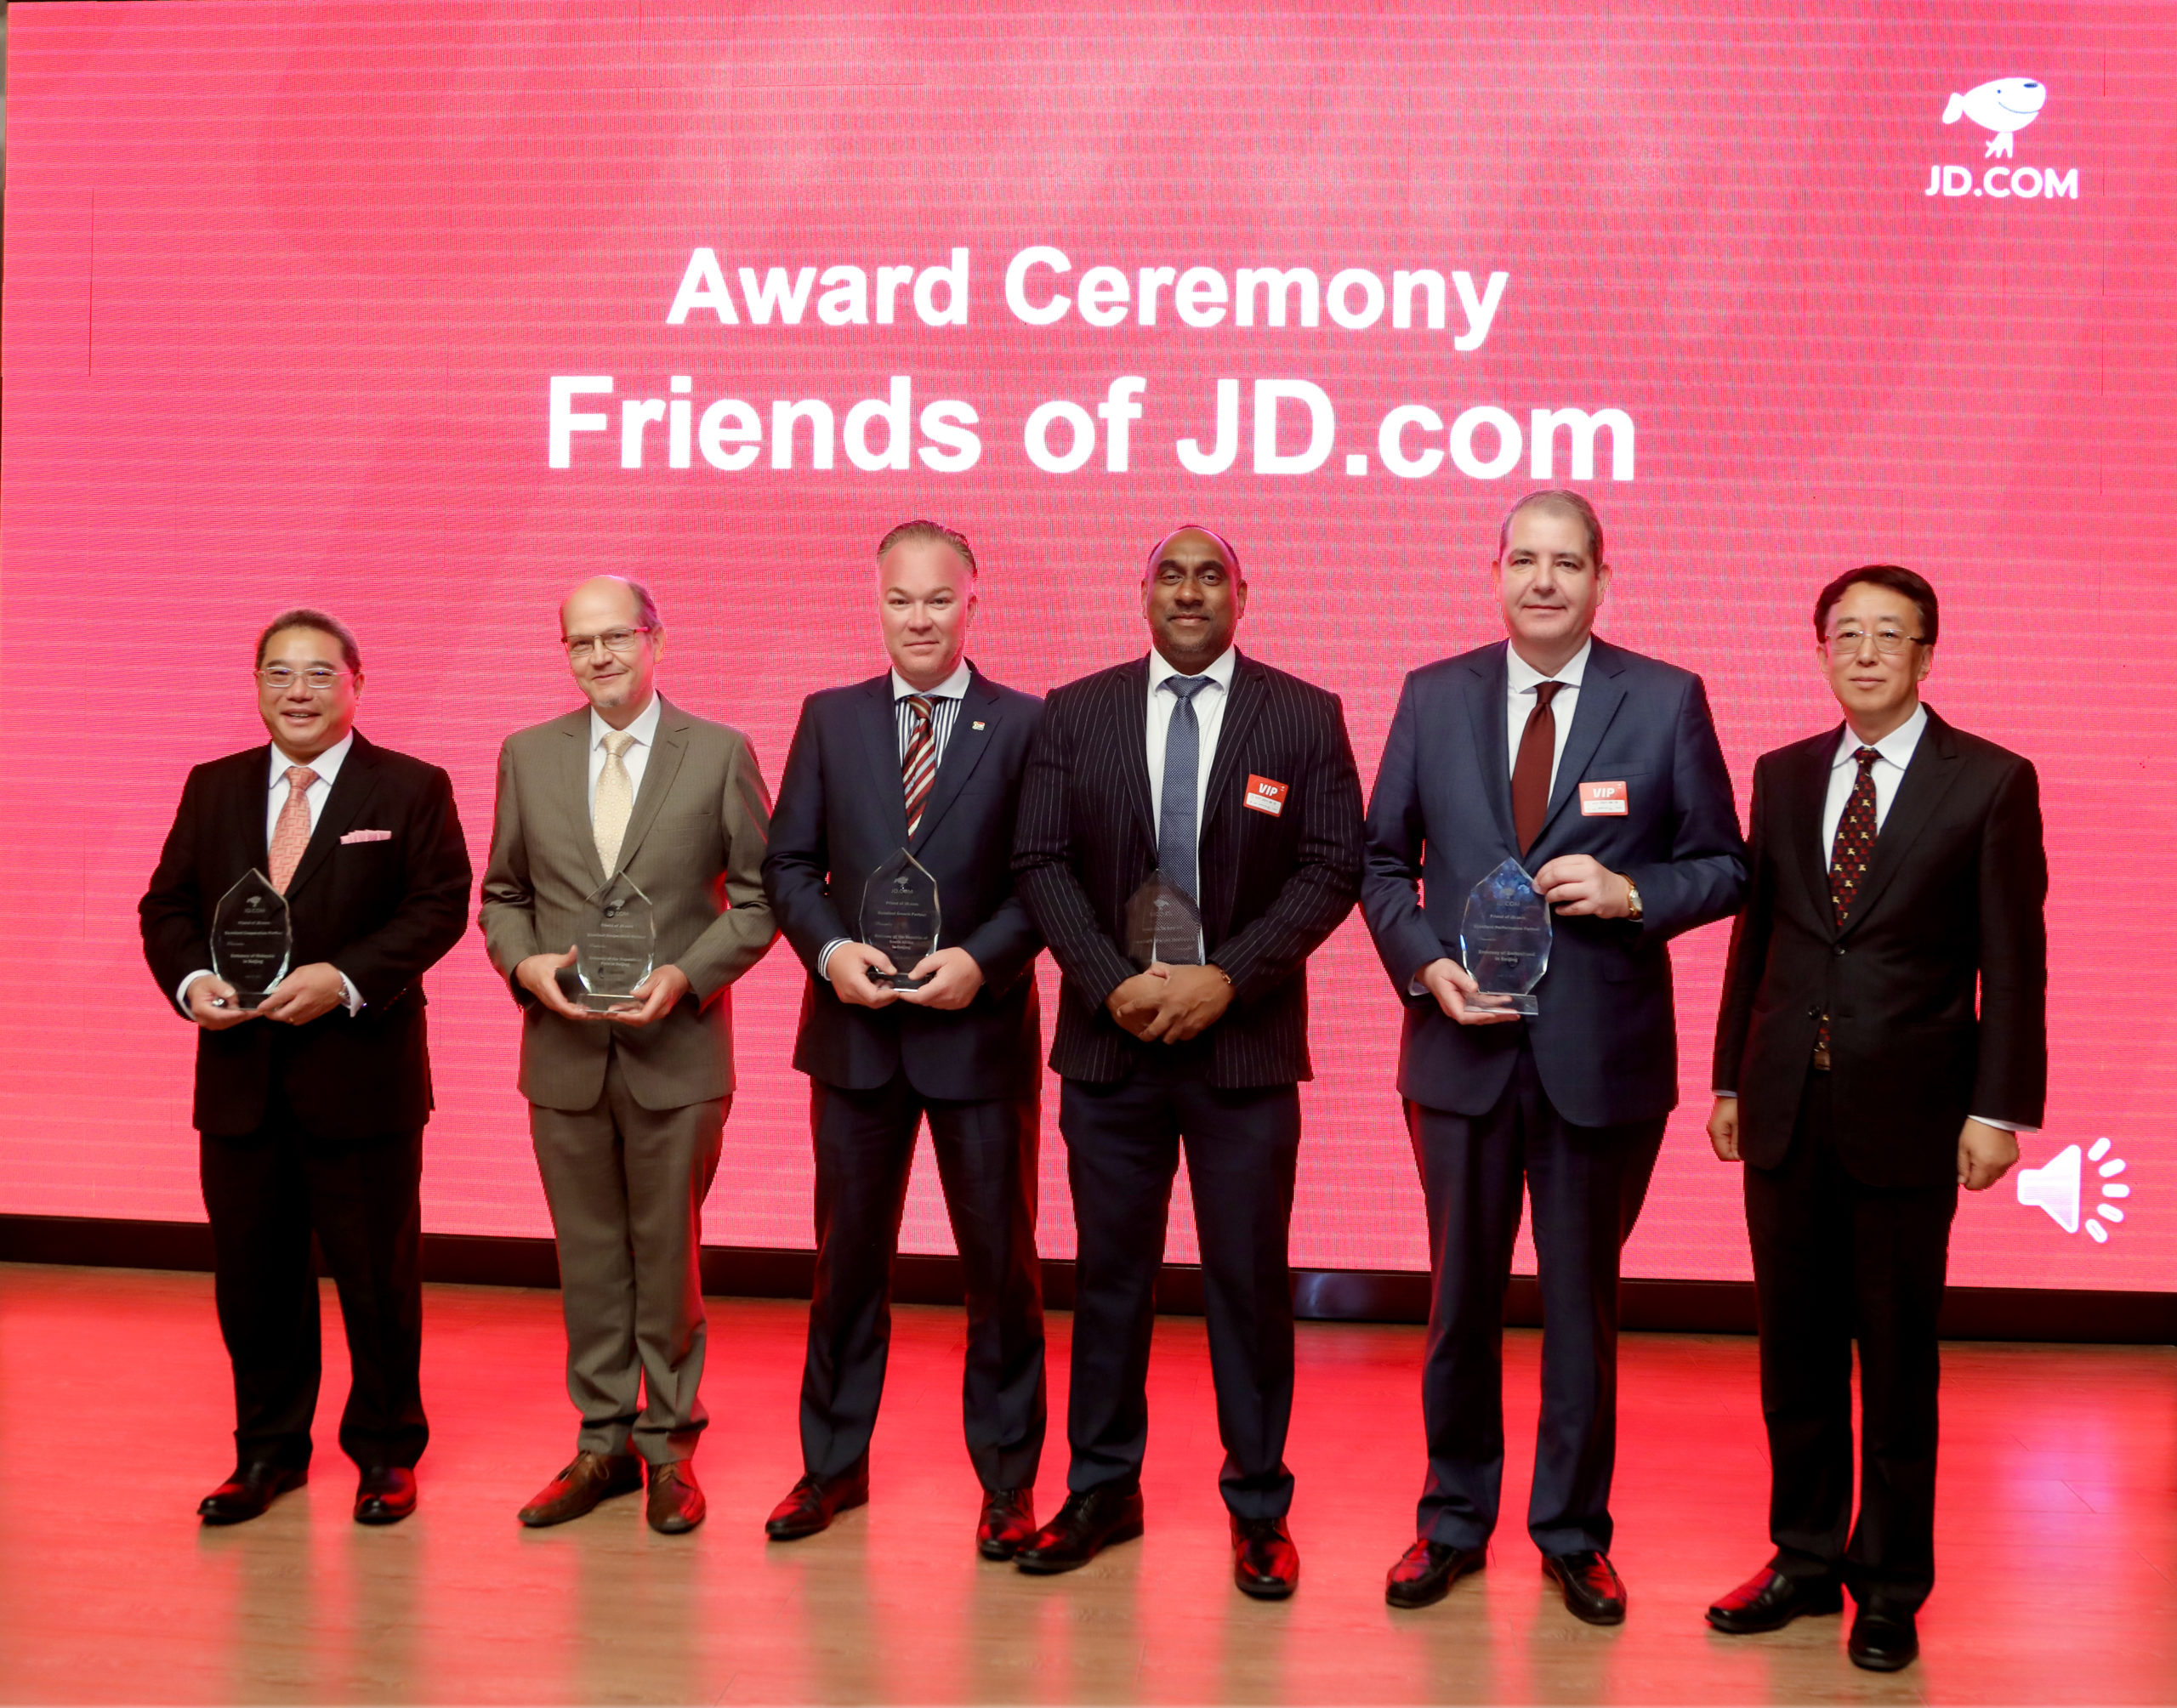 Mr. Yves Morath (second from the right) received the “Friend of JD.com” award on behalf of the Swiss Embassy